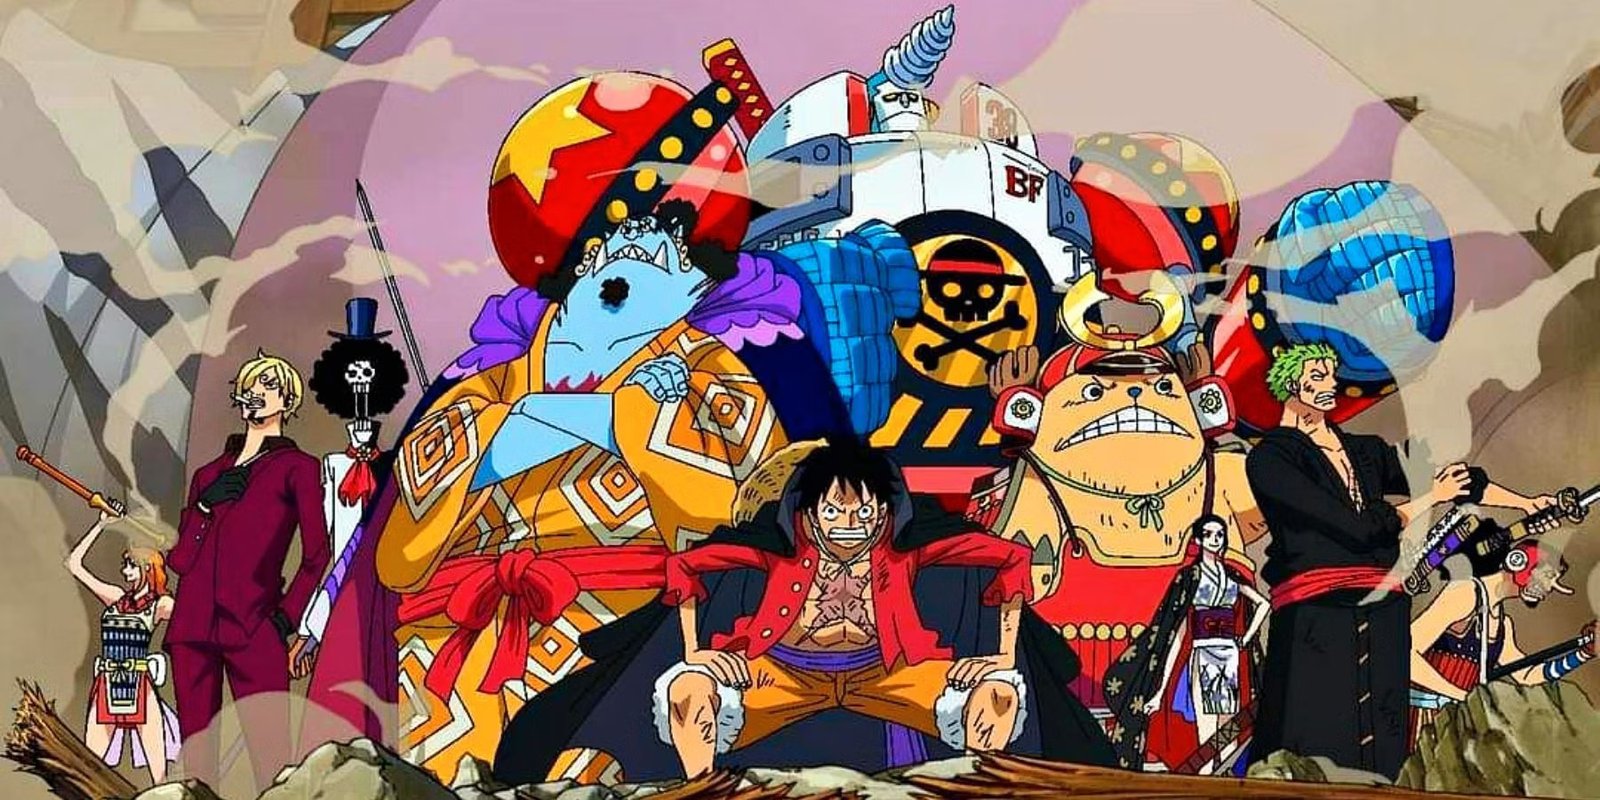 On Skypiea arc of One Piece. It's my 4th favorite Manga, amazing cast of  characters, unique artstyle, and the story is amazing. Unlike most, I'd say  this series gets better the more